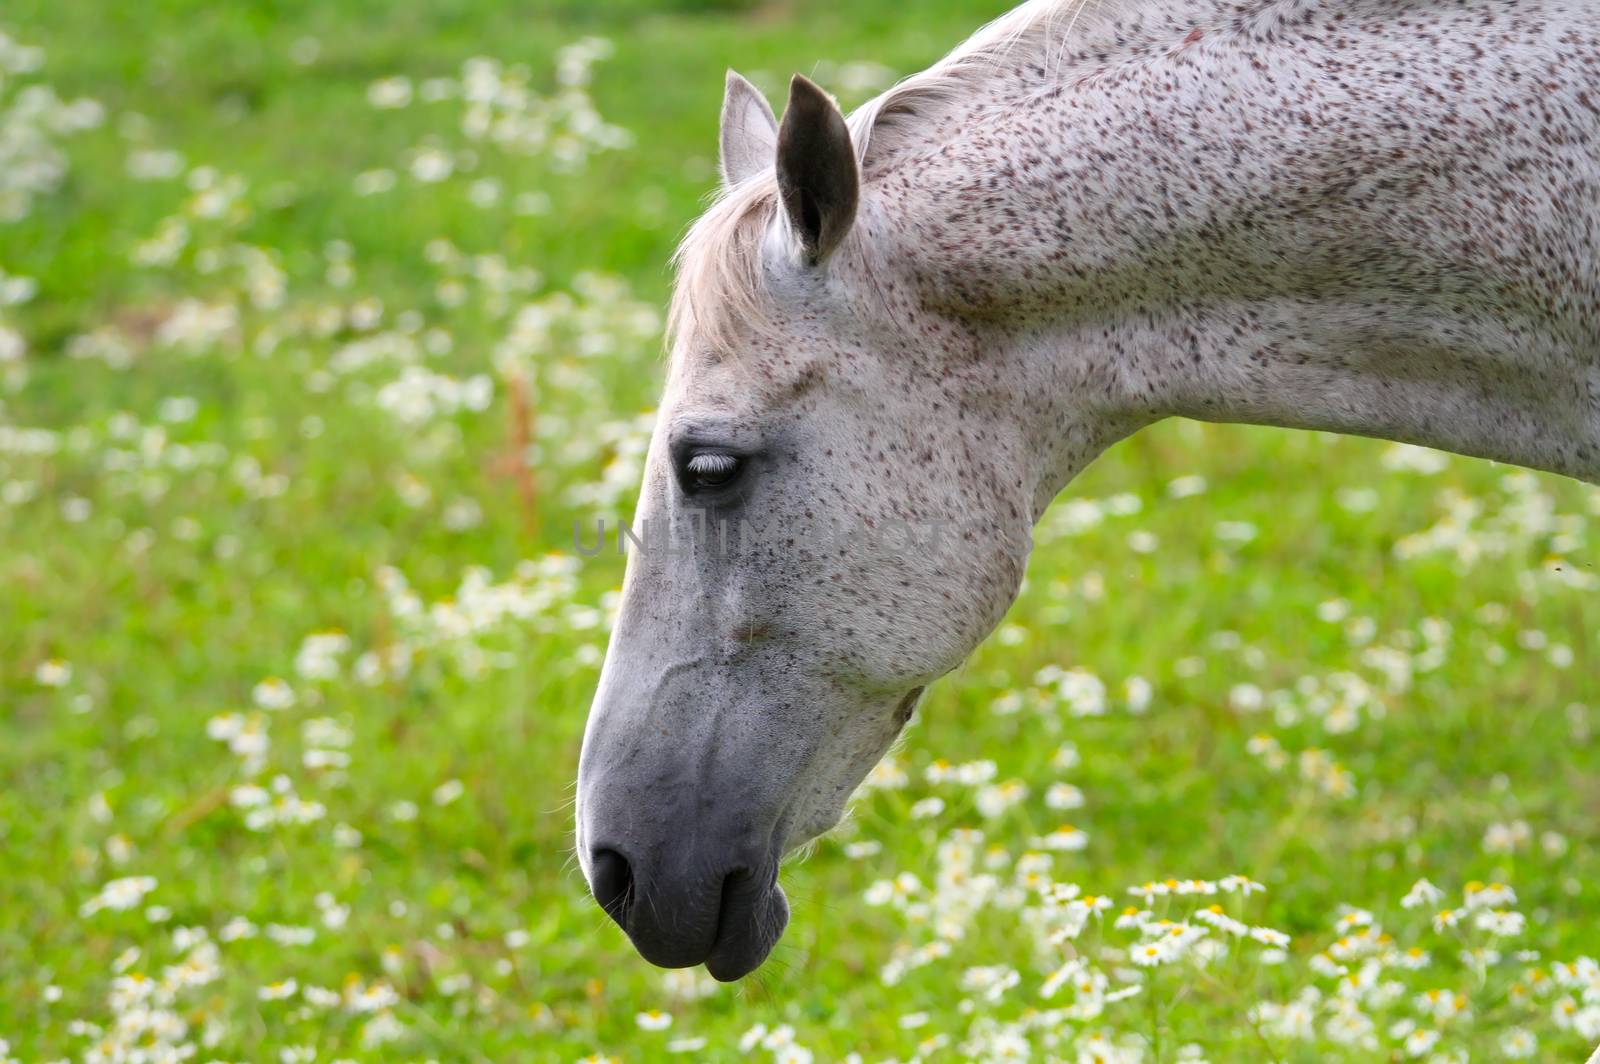 Sad look of a white horse. Close portrait from the side. Beautiful green field with flowers on the background.